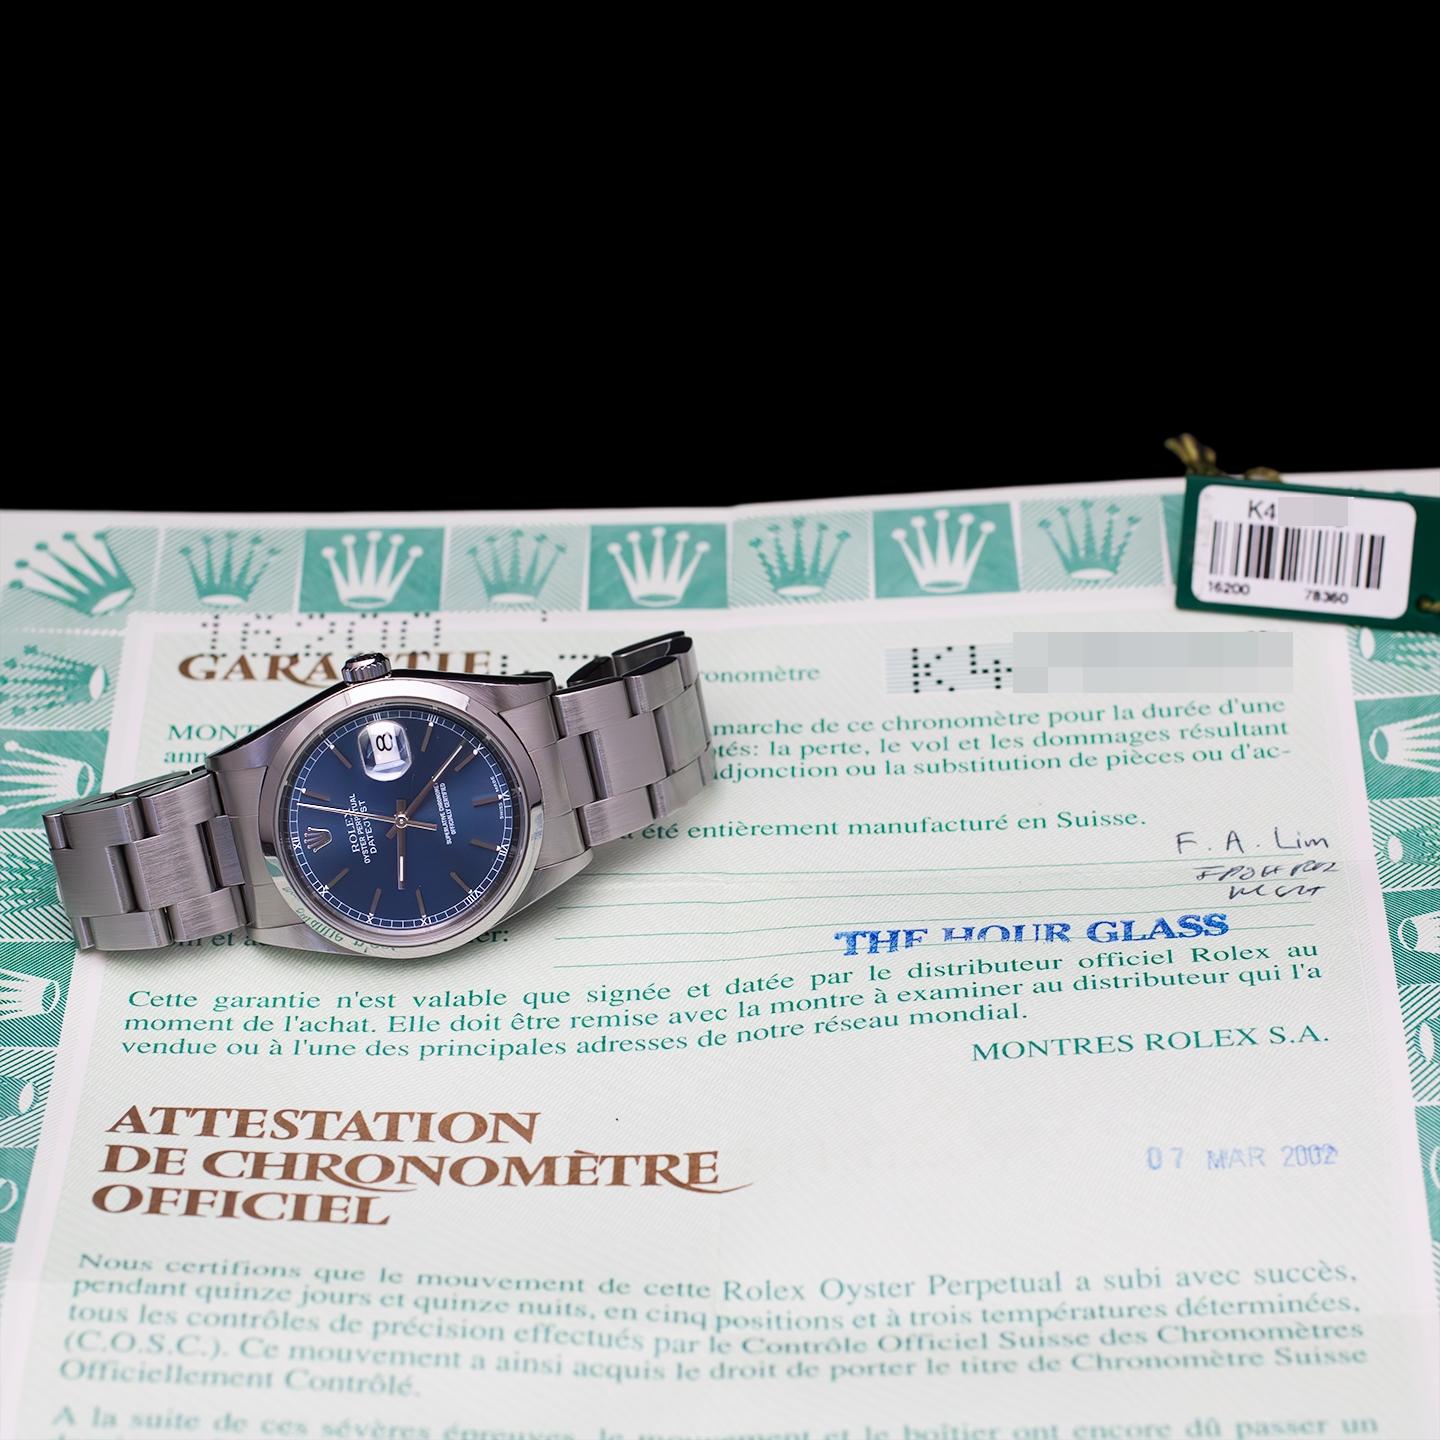 Brand: Vintage Rolex
Model: 16200
Year: 2001
Serial number: K4xxxxx
Reference: C03842

Case: 36mm Steel Case without crown; Show sign of wear with slight polish from previous; inner case back stamped 2080

Dial: Excellent Condition Blue Dial w/